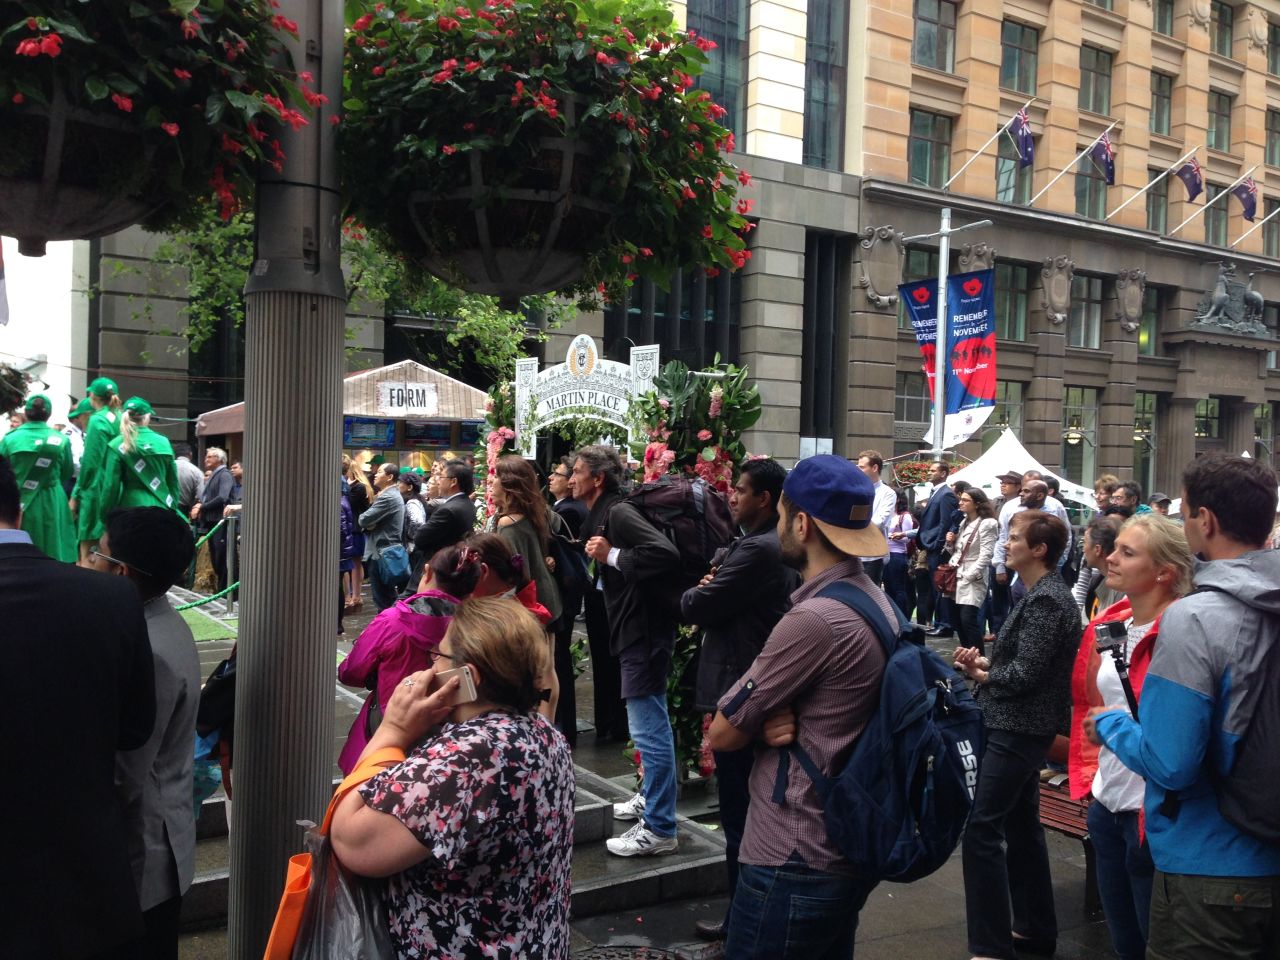 Crowds gather in Sydney's Martin Place -- <a href="http://edition.cnn.com/2014/12/15/world/asia/australia-sydney-hostage-situation/">where the Lindt  Chocolate Cafe shooting took place in December 2014</a> -- to watch the race.